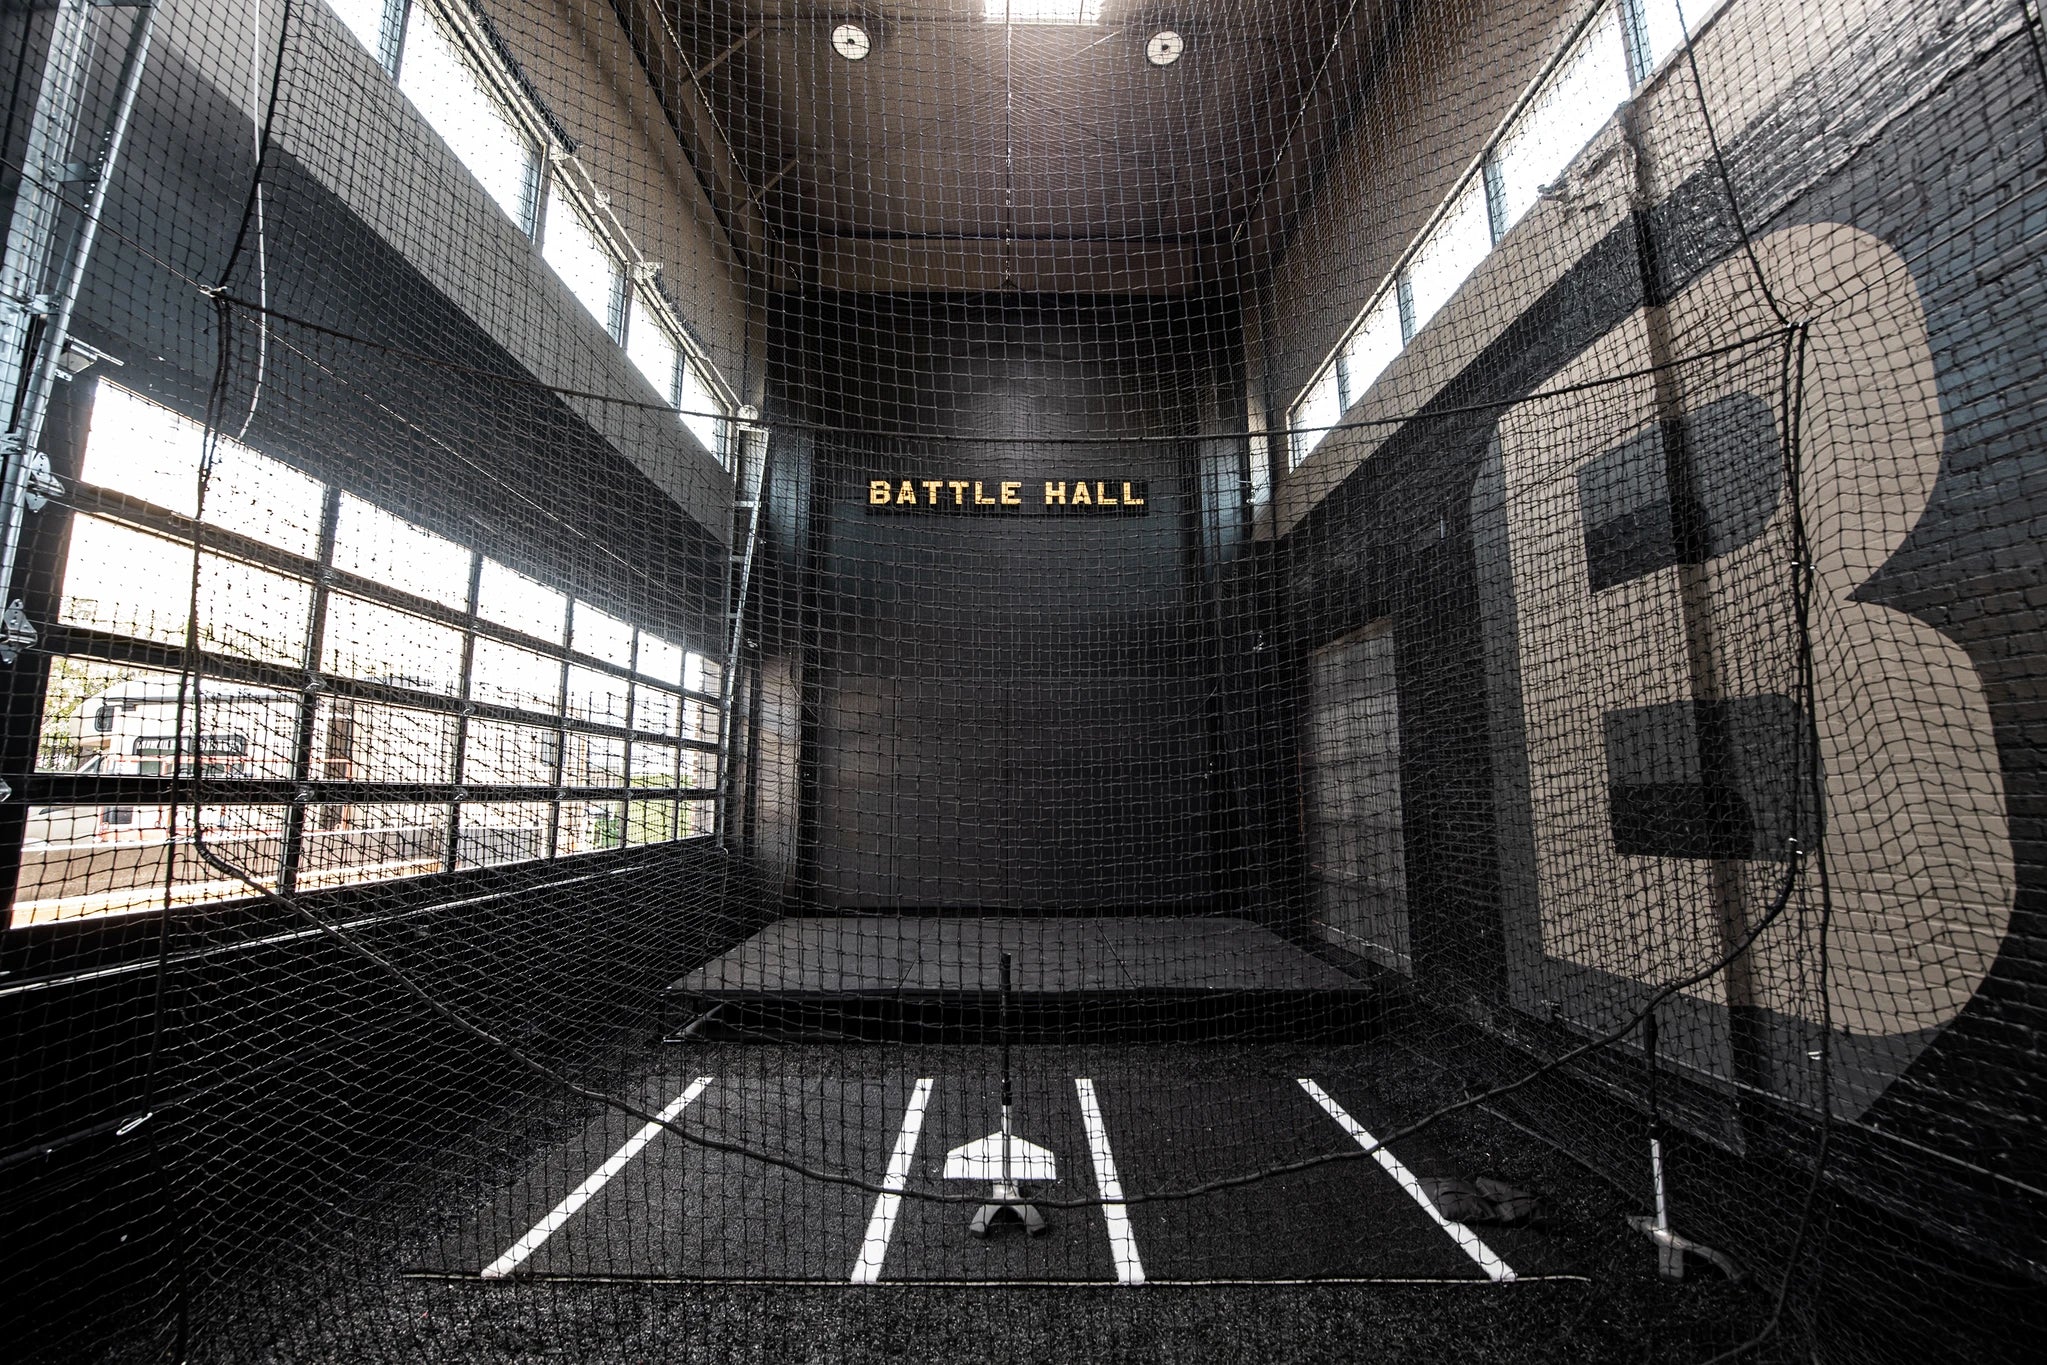 Battle Hall at the Warstic Flagship Store